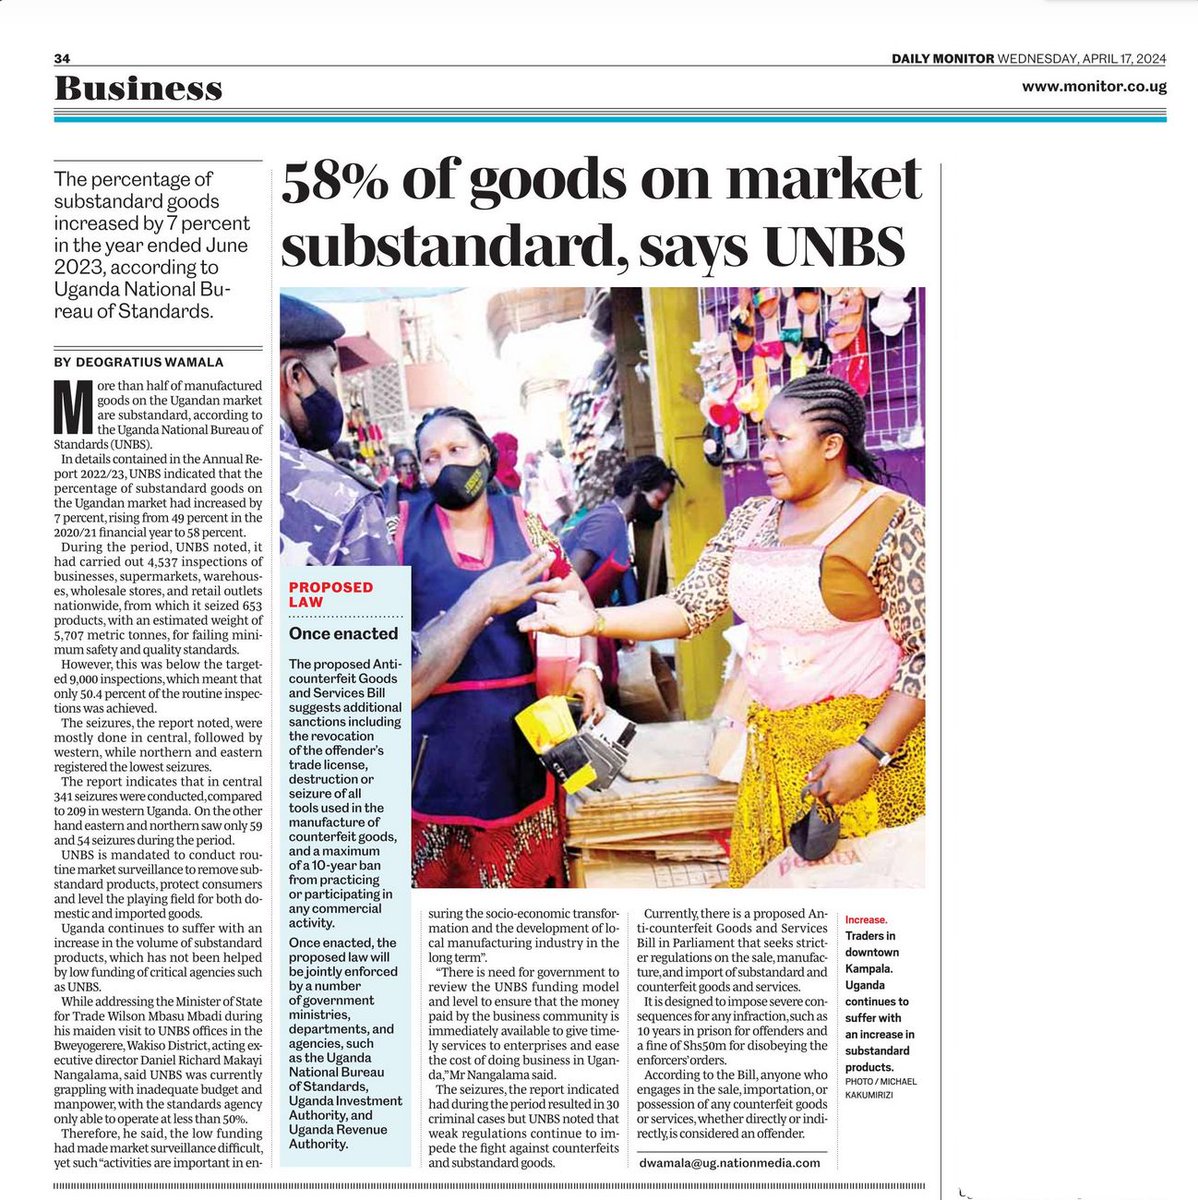 @DailyMonitor's report revealing 58% of goods in Uganda as substandard is a wake-up call for consumers to stay vigilant. Government must step up support for @UNBSug to ensure rigorous enforcement of quality standards to safeguard consumers from harm. #ConsumerProtection